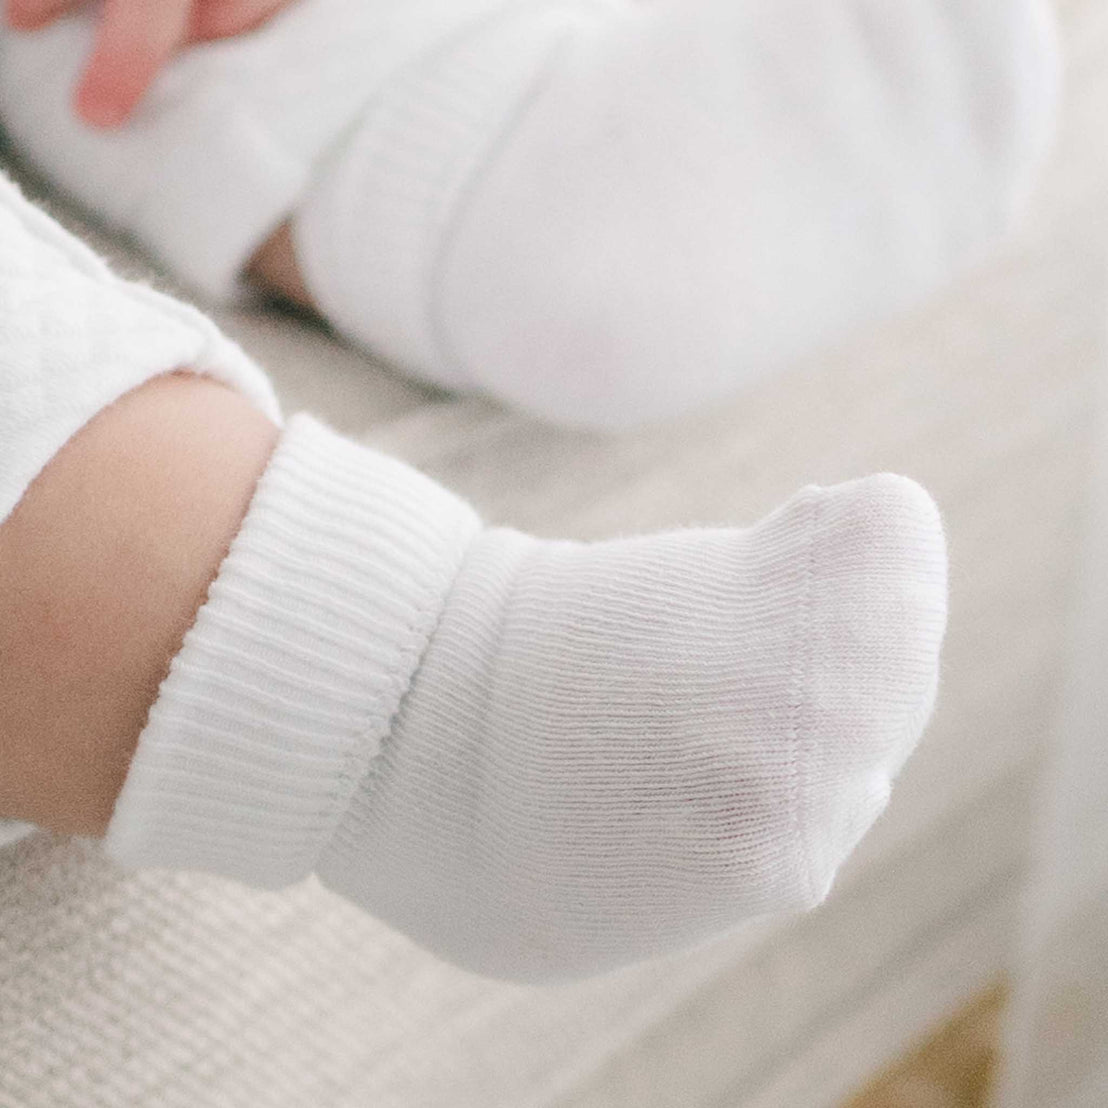 Close-up of a baby's tiny foot wearing a pair of Girls Simple Socks, resting on a soft beige surface, emphasizing the intricate texture of the sock and the plumpness of the foot.